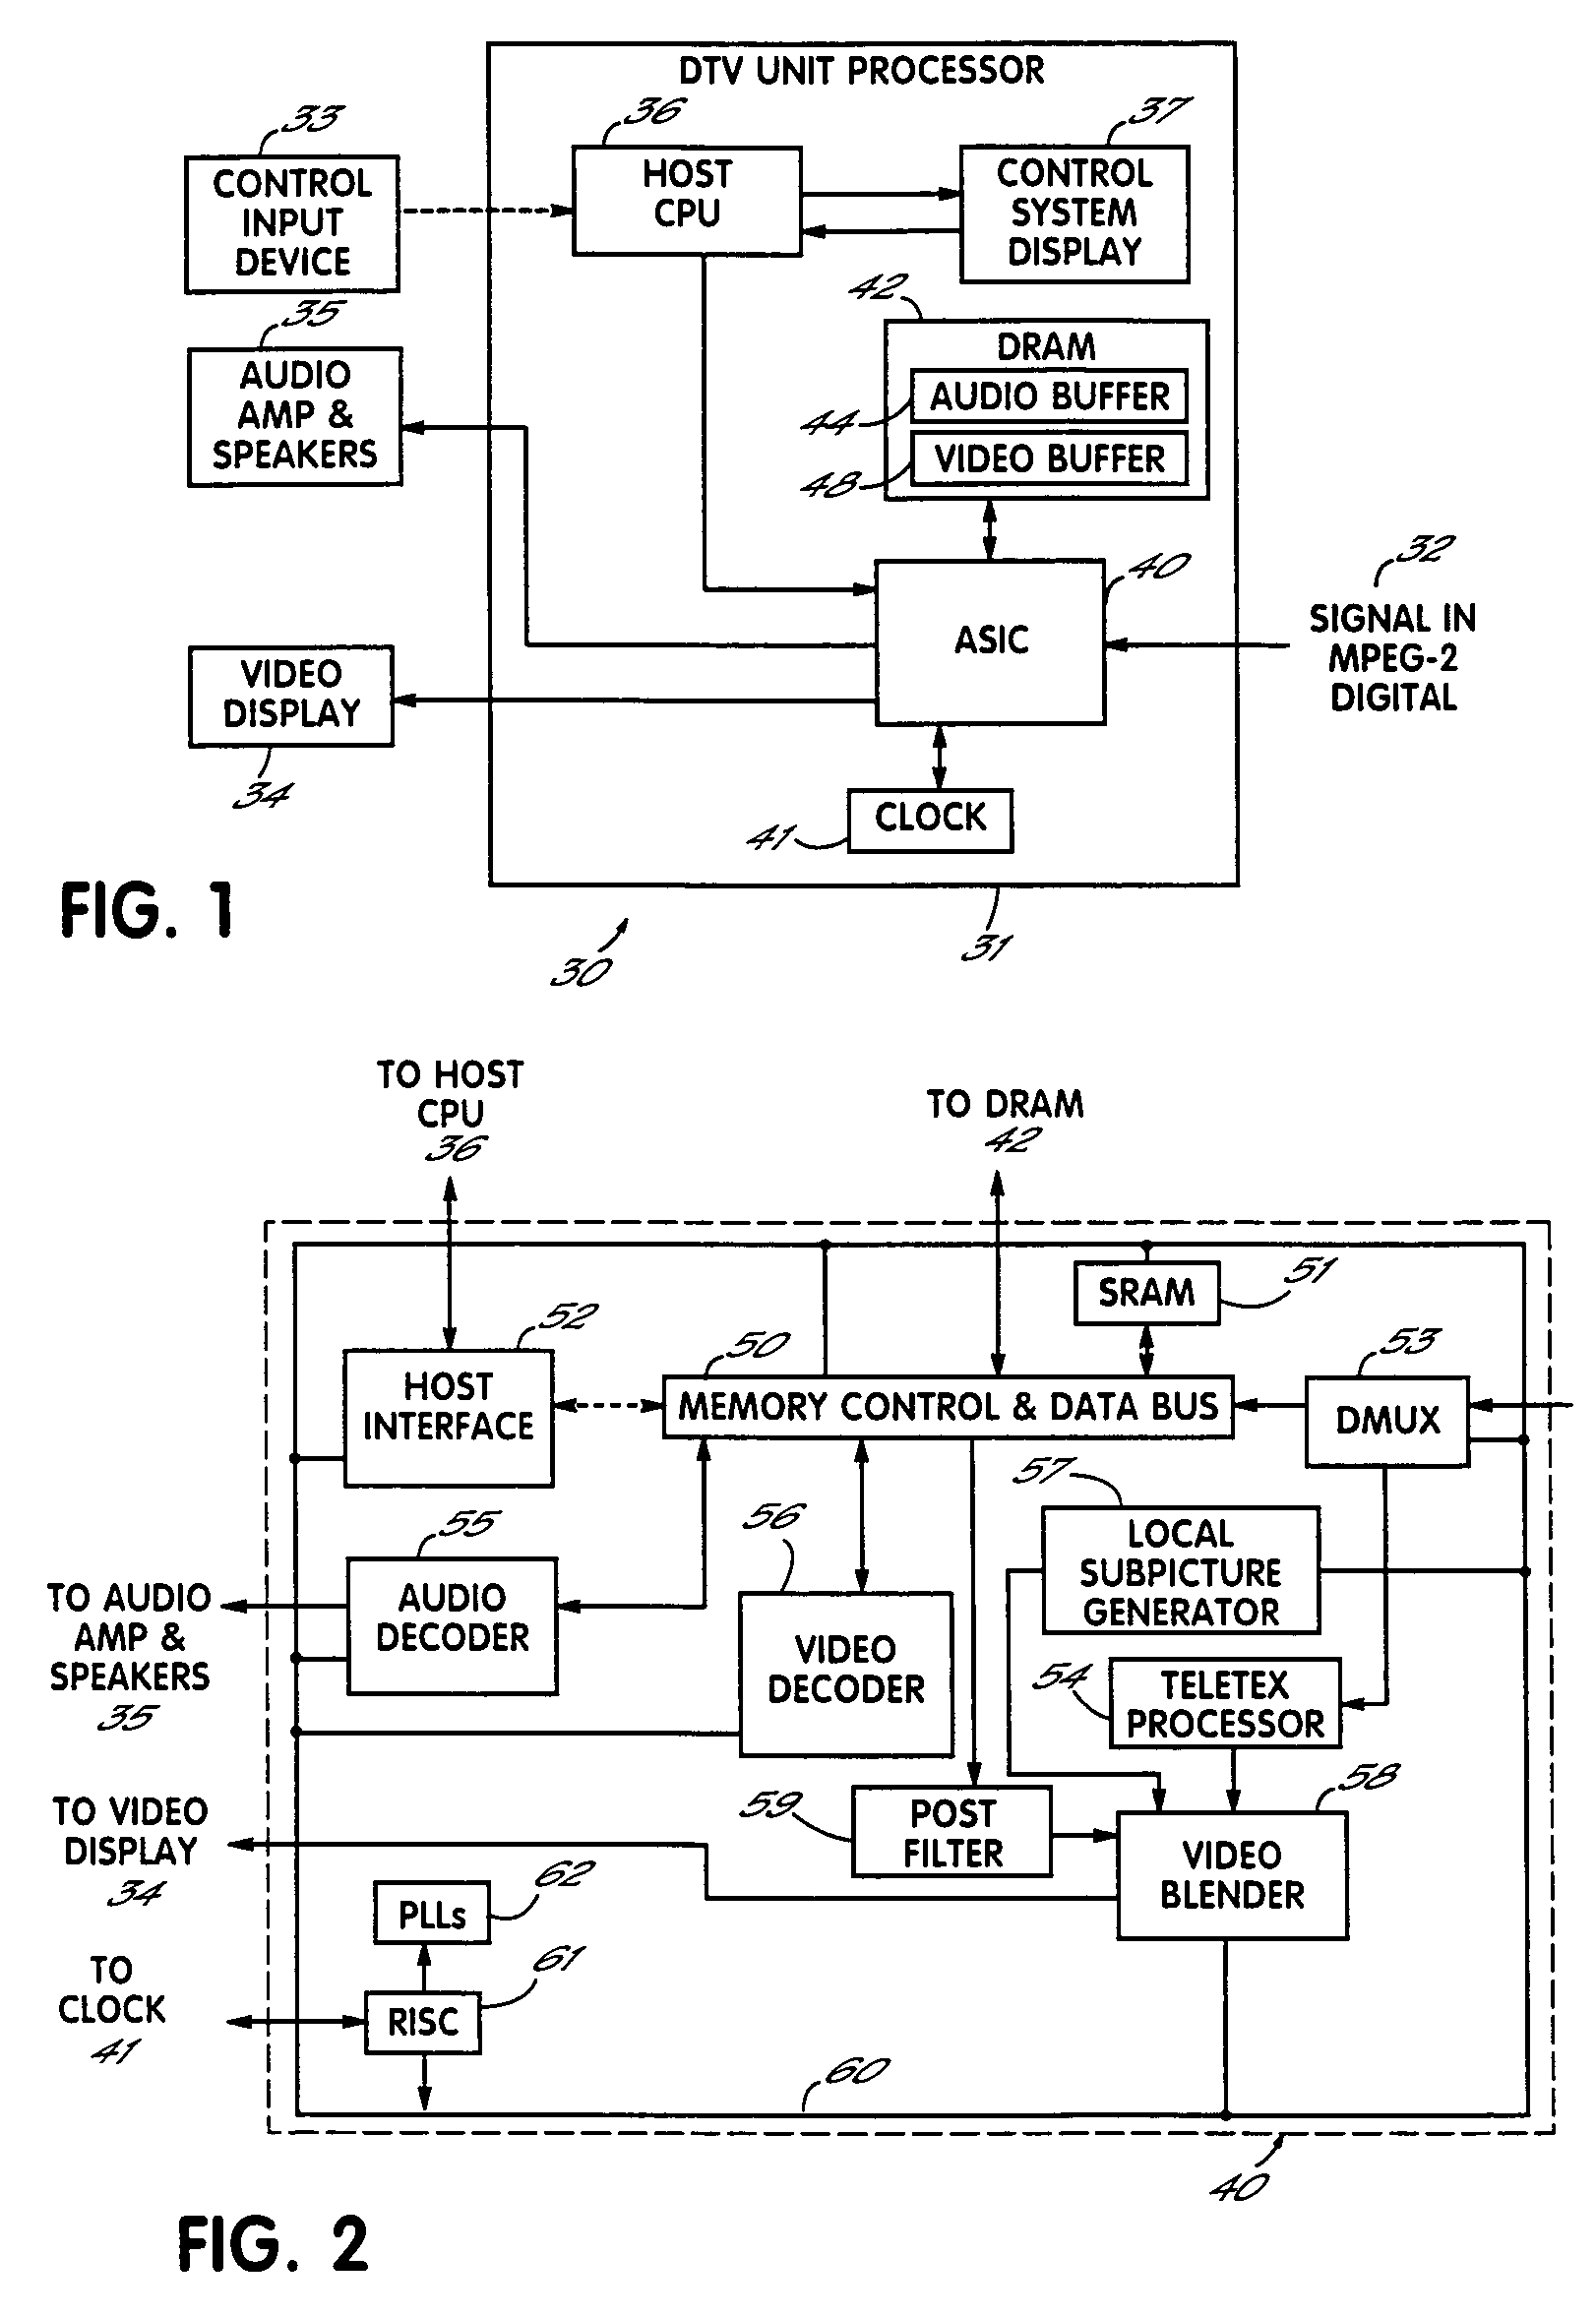 Digital video decoding, buffering and frame-rate converting method and apparatus